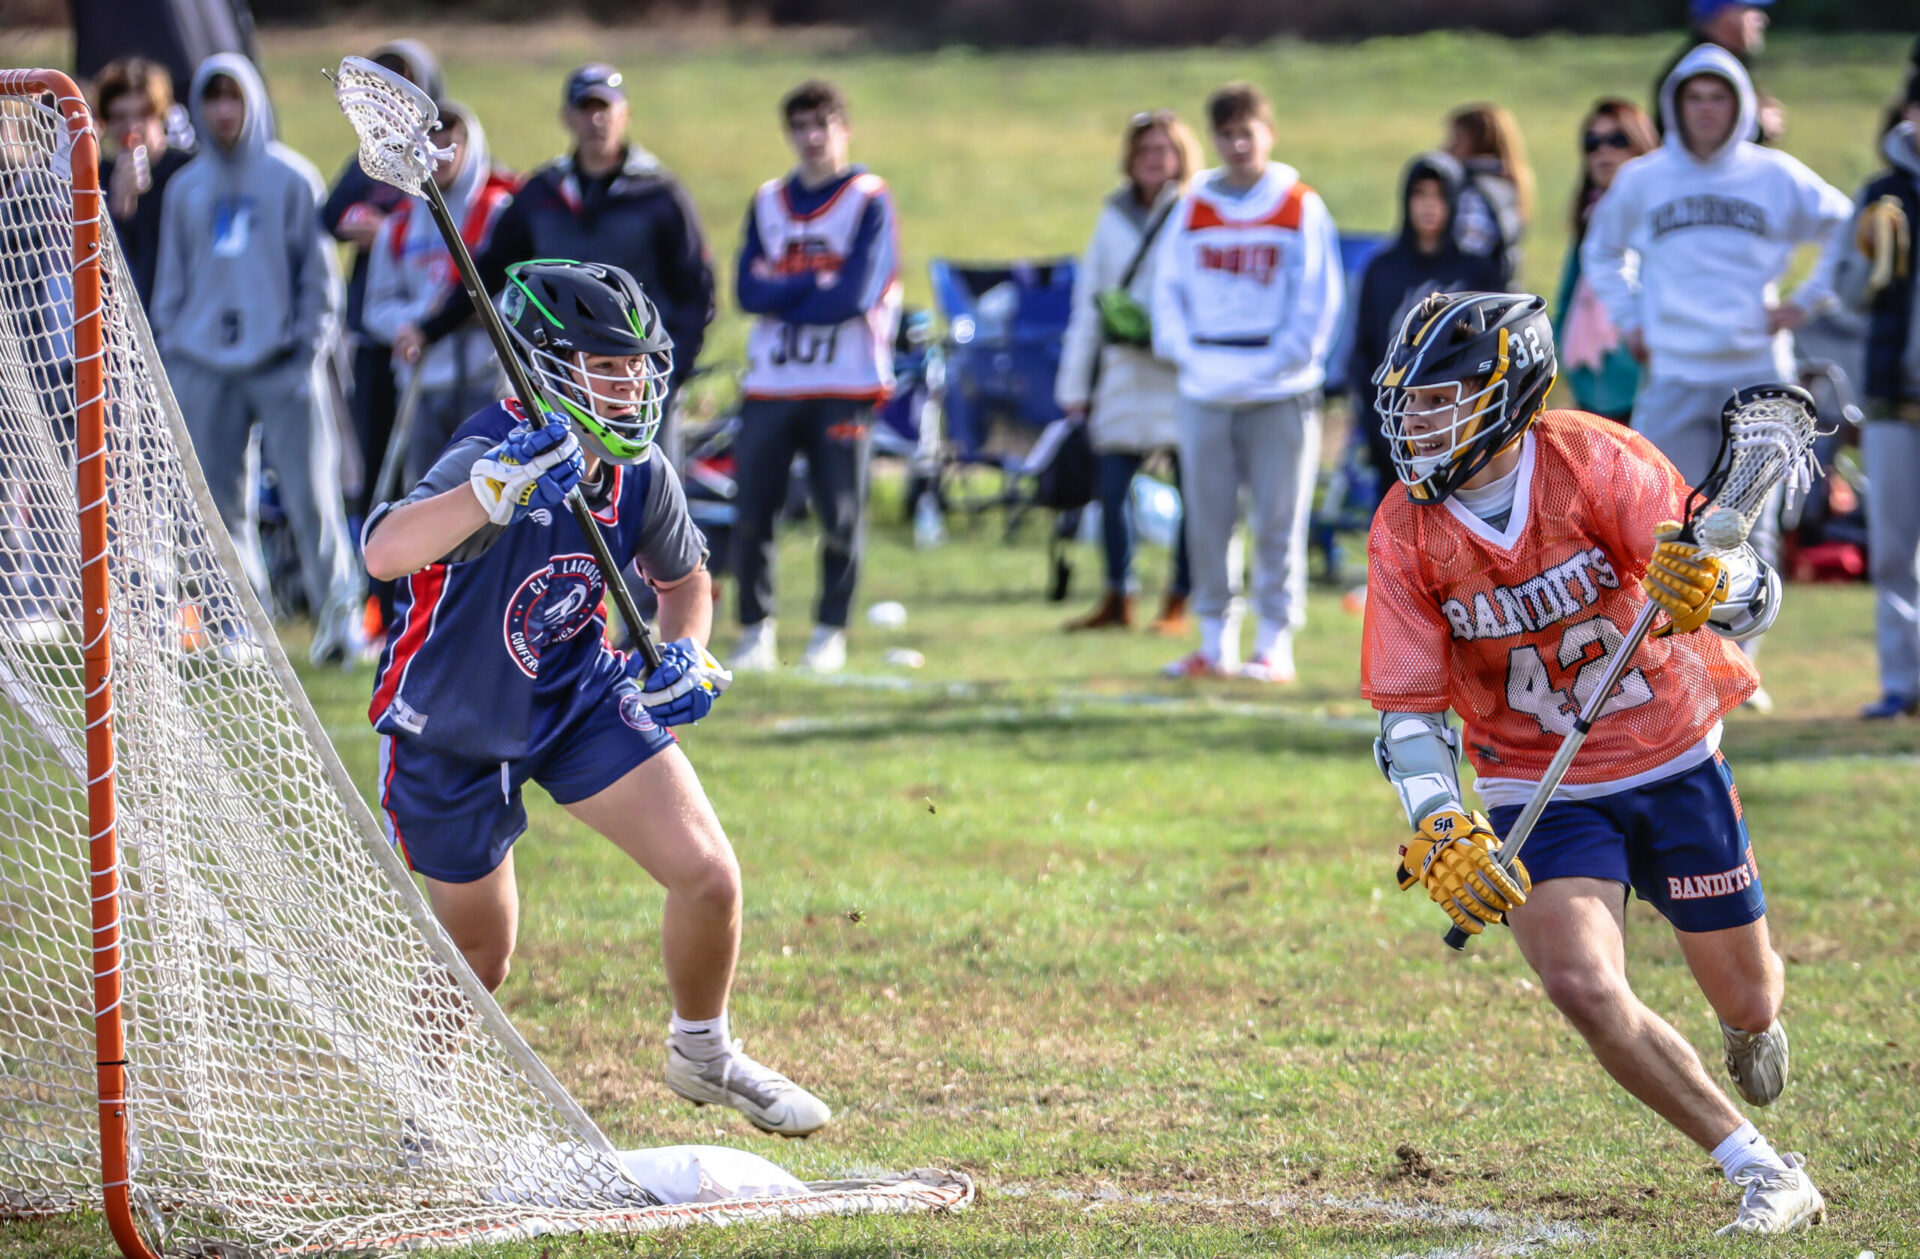 MLT Announces Exciting Fall 2022 Schedule My Lacrosse Tournaments